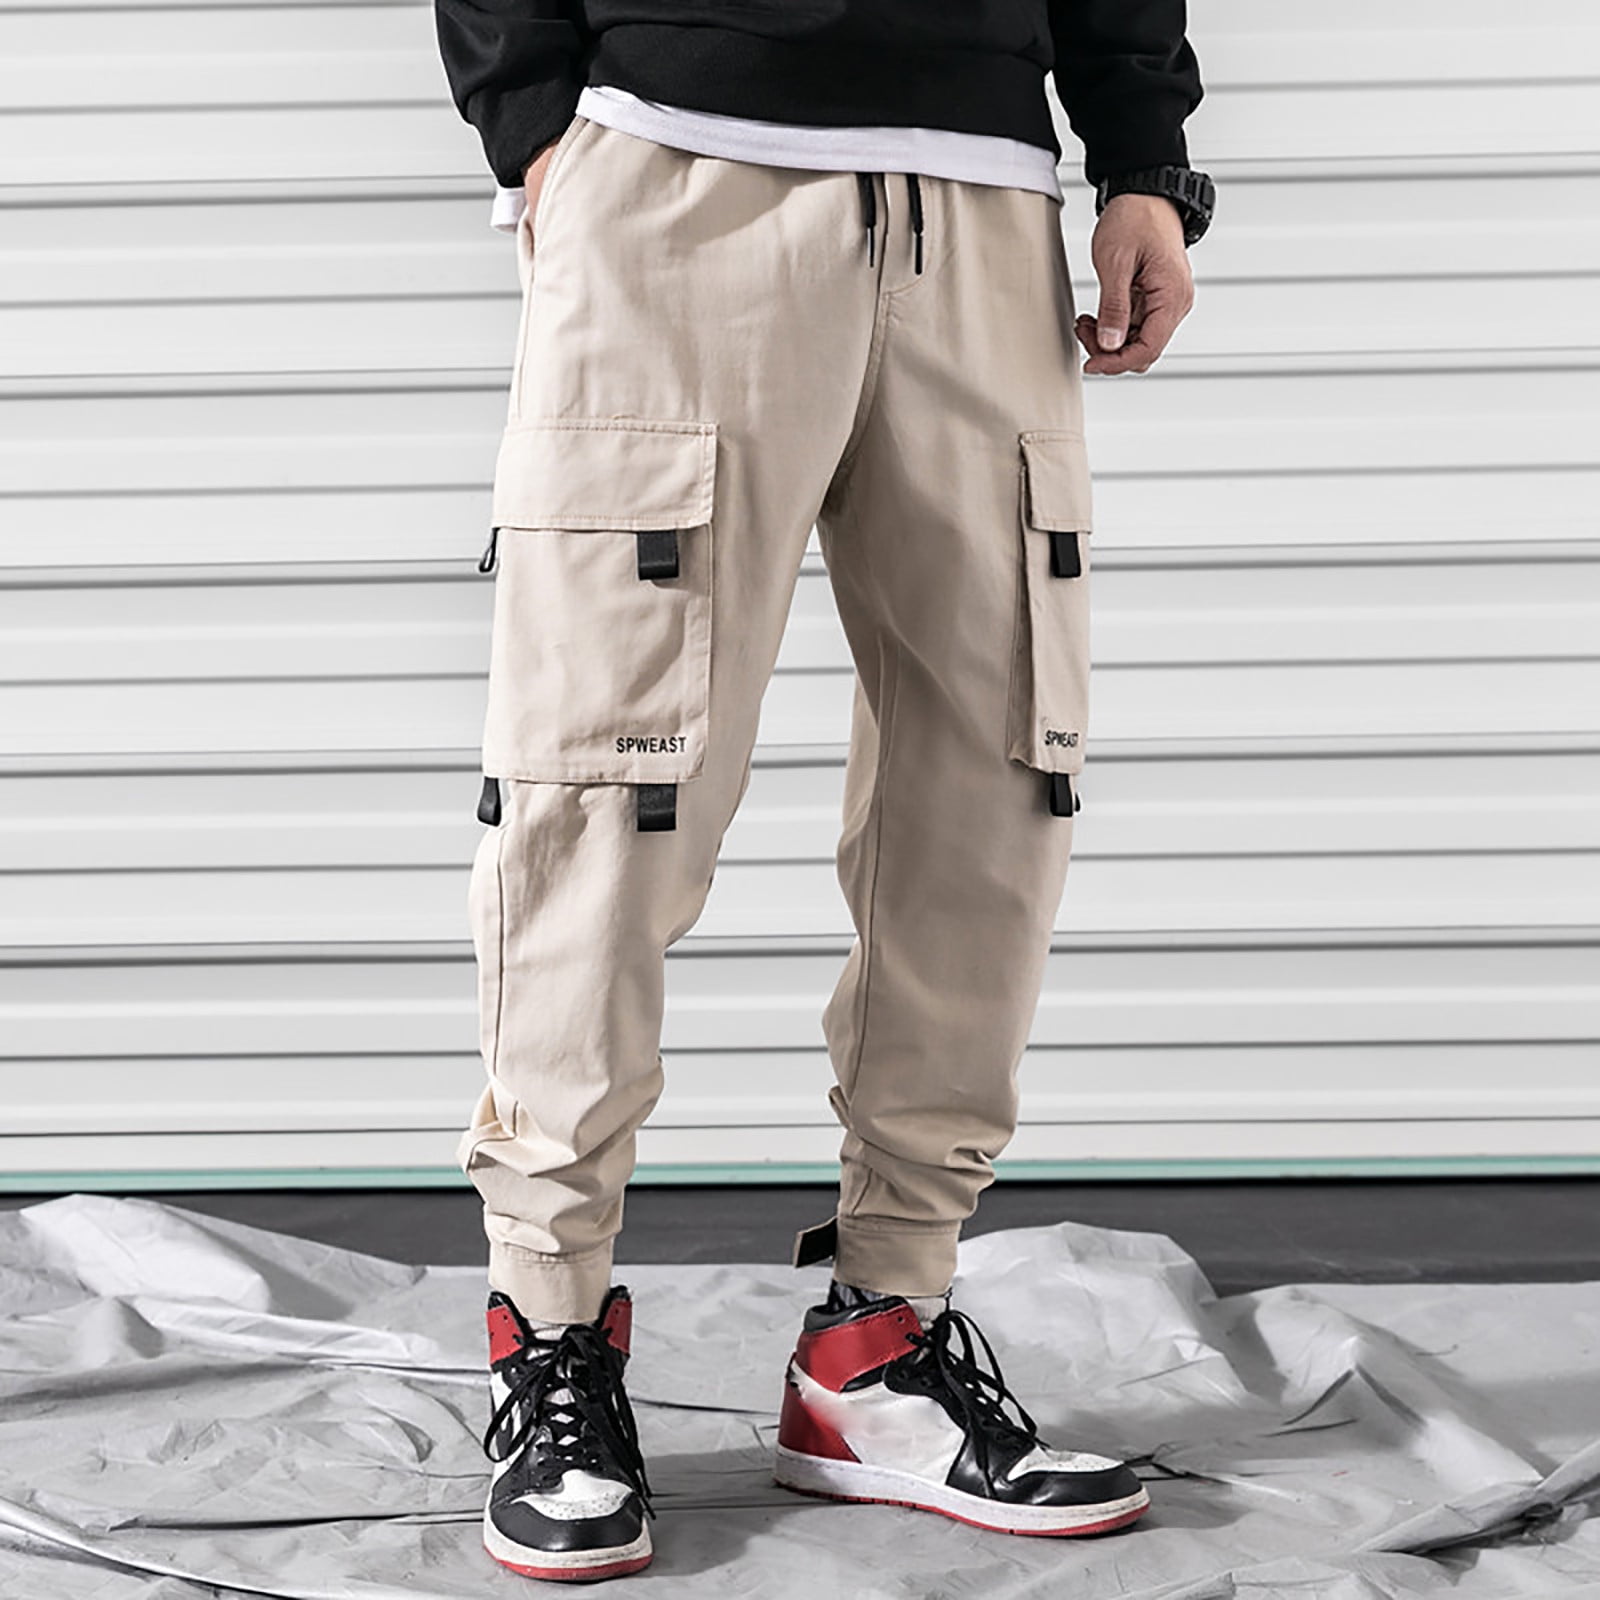 Ayolanni Khaki Wide Leg Cargo Pants for Men Solid Color Casual Pants  Drawstring Mouth Hiking Work Pants Outdoor Clothing Xx